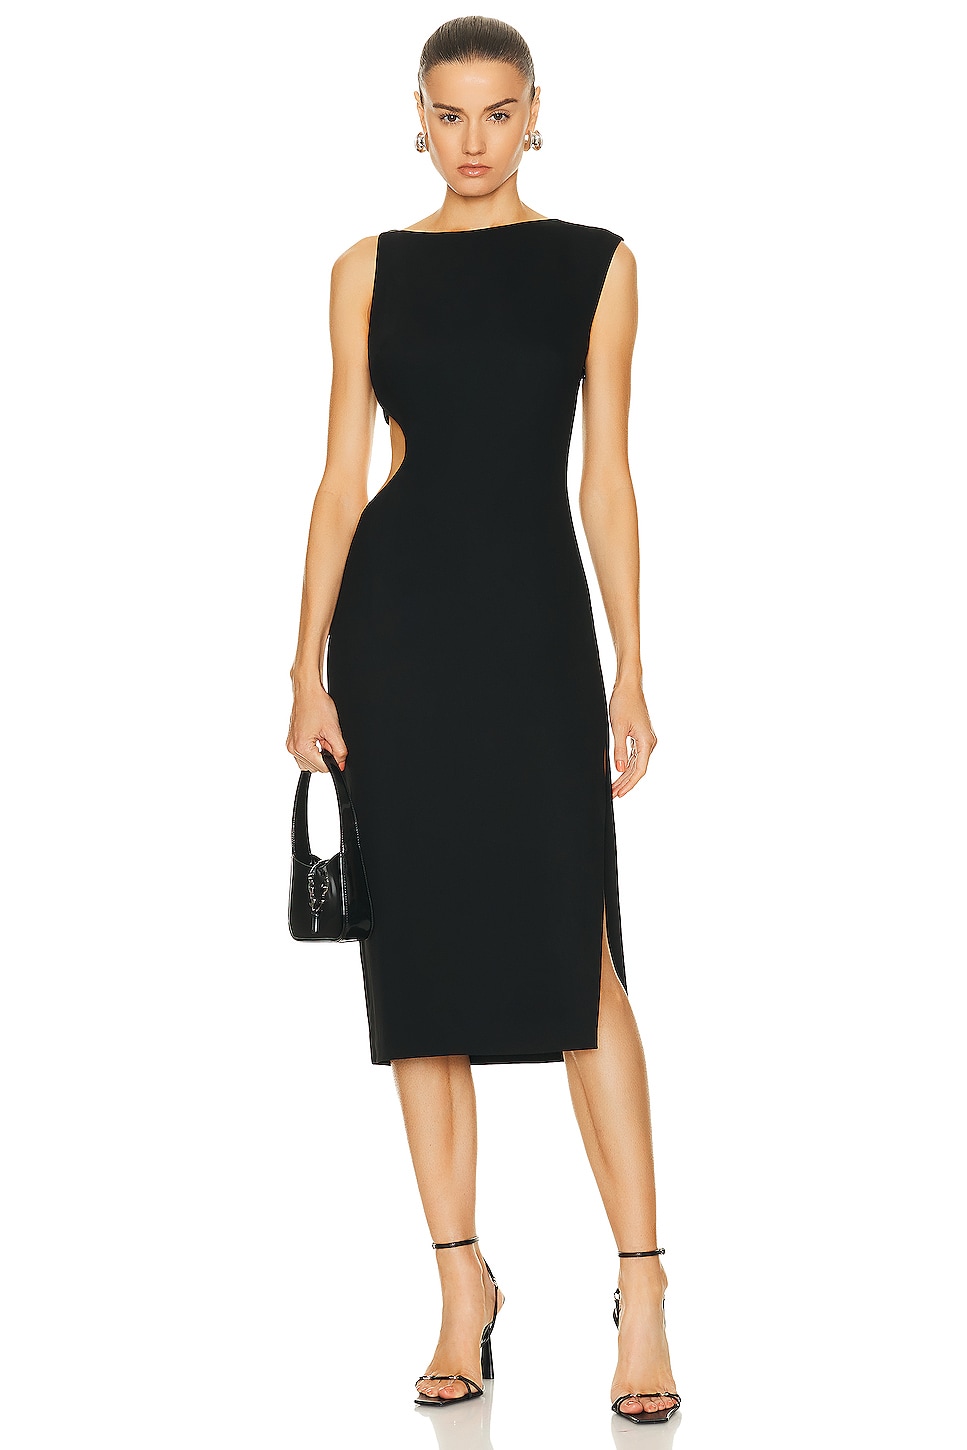 Image 1 of St. Agni Arc Cut Out Dress in Black